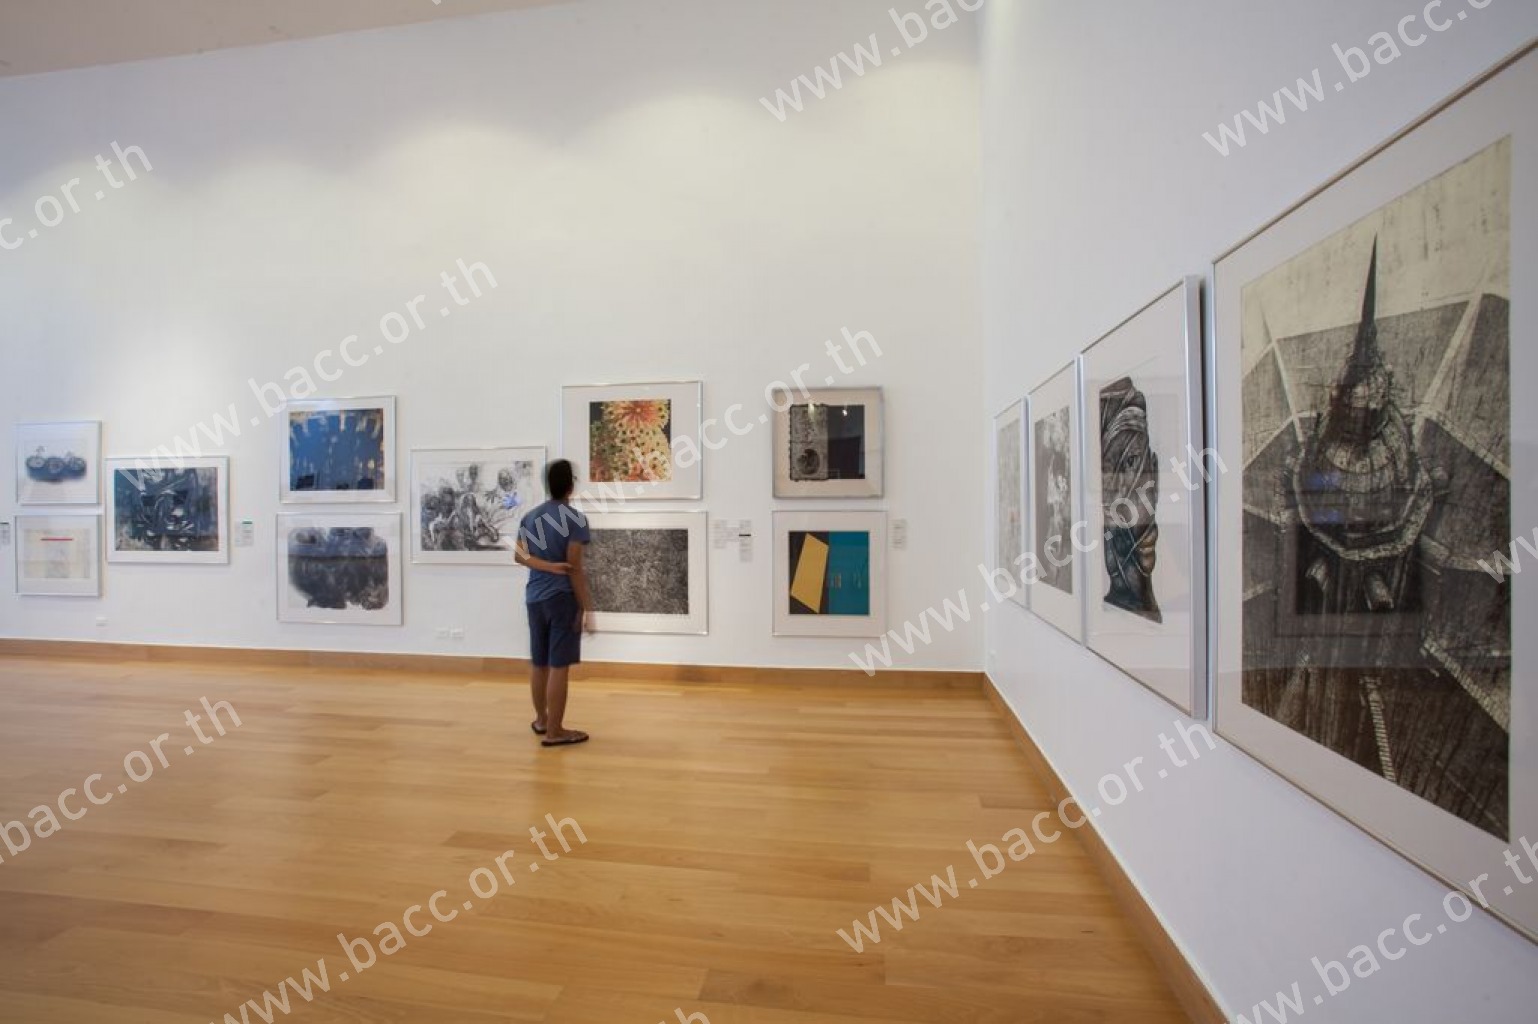 The 4th Bangkok Triennale International Print and Drawing Exhibition